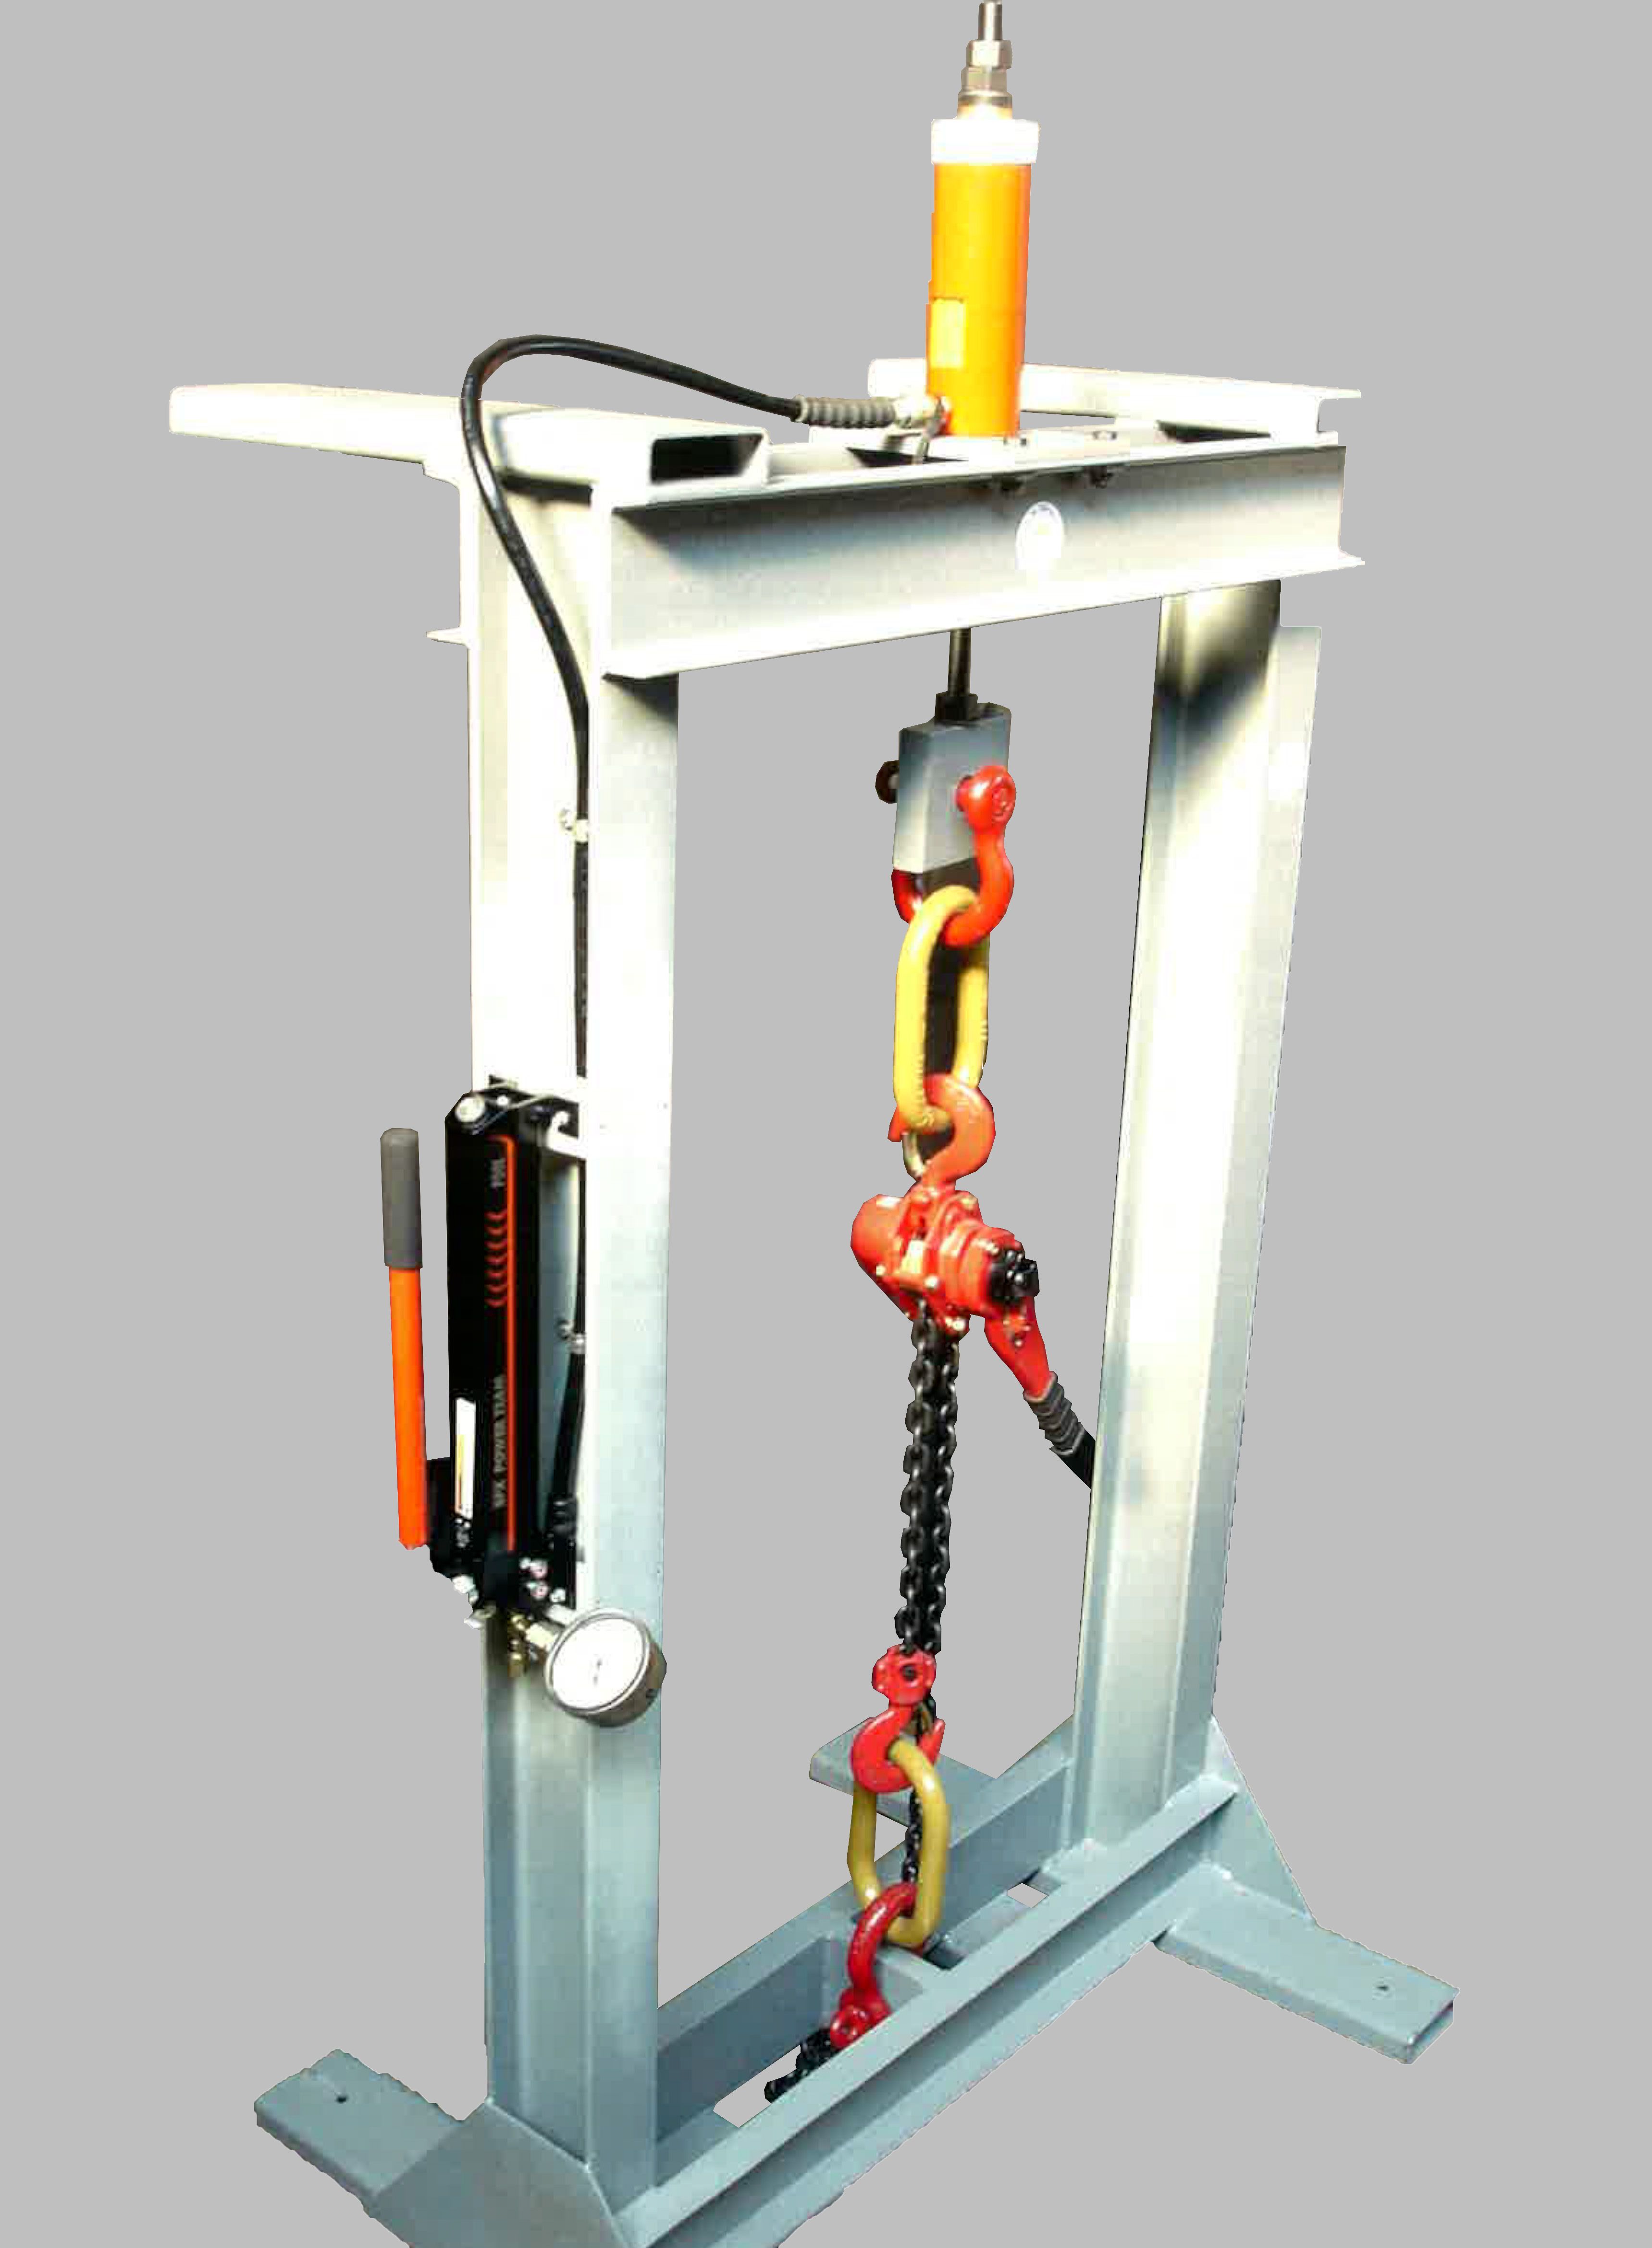 //pridetool.com/wp-content/uploads/2023/05/16-Ton-Pride-Tool-Hoist-and-Lift-Sling-Test-Stand-GrayBG.png